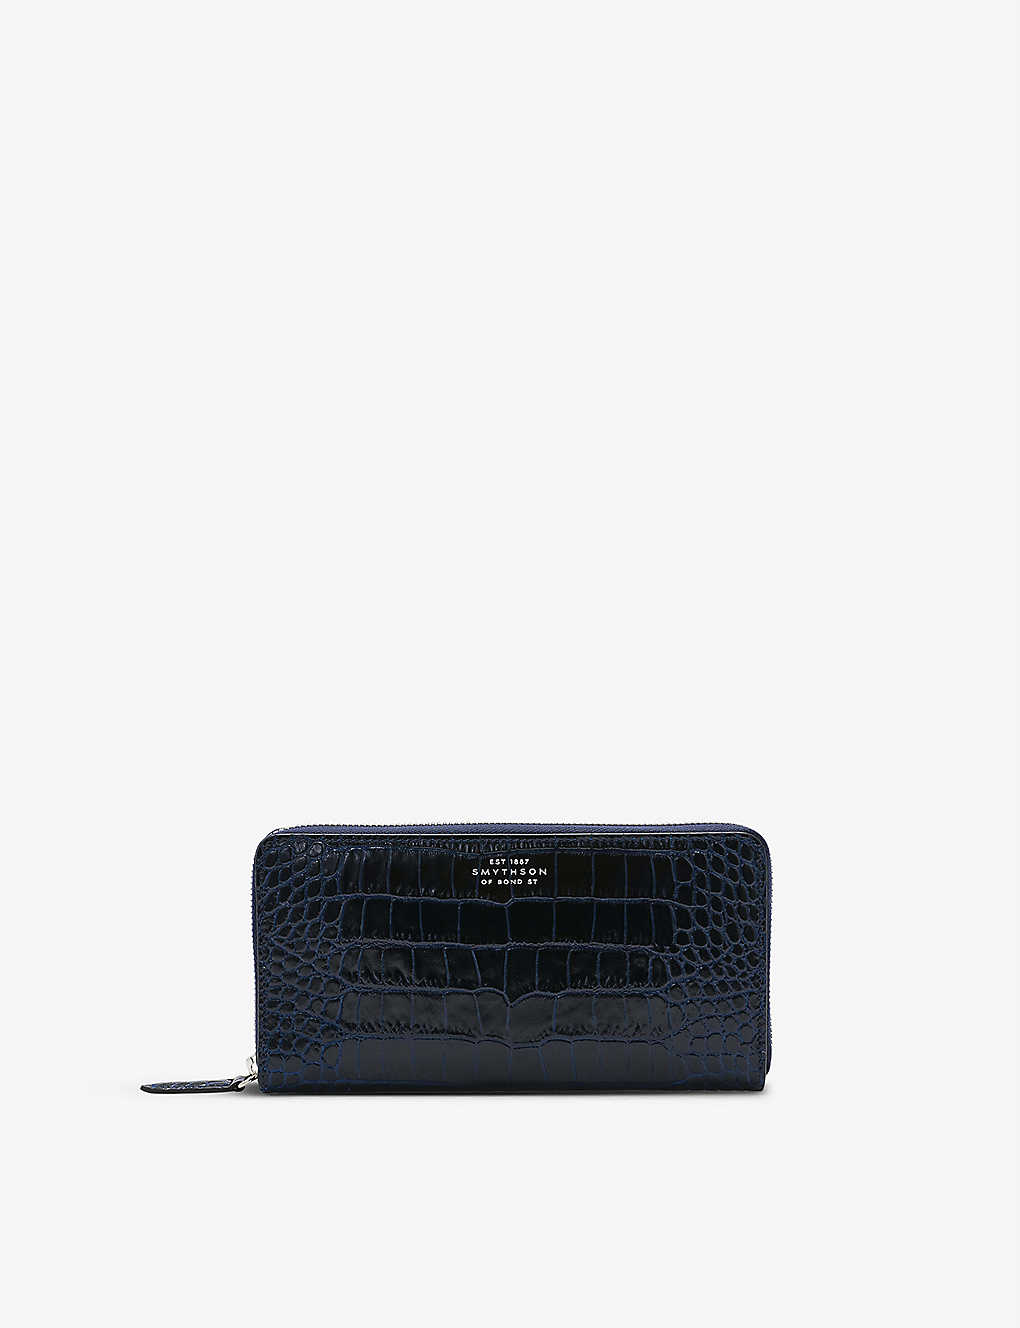 Smythson Mara Branded Large Leather Purse In Navy